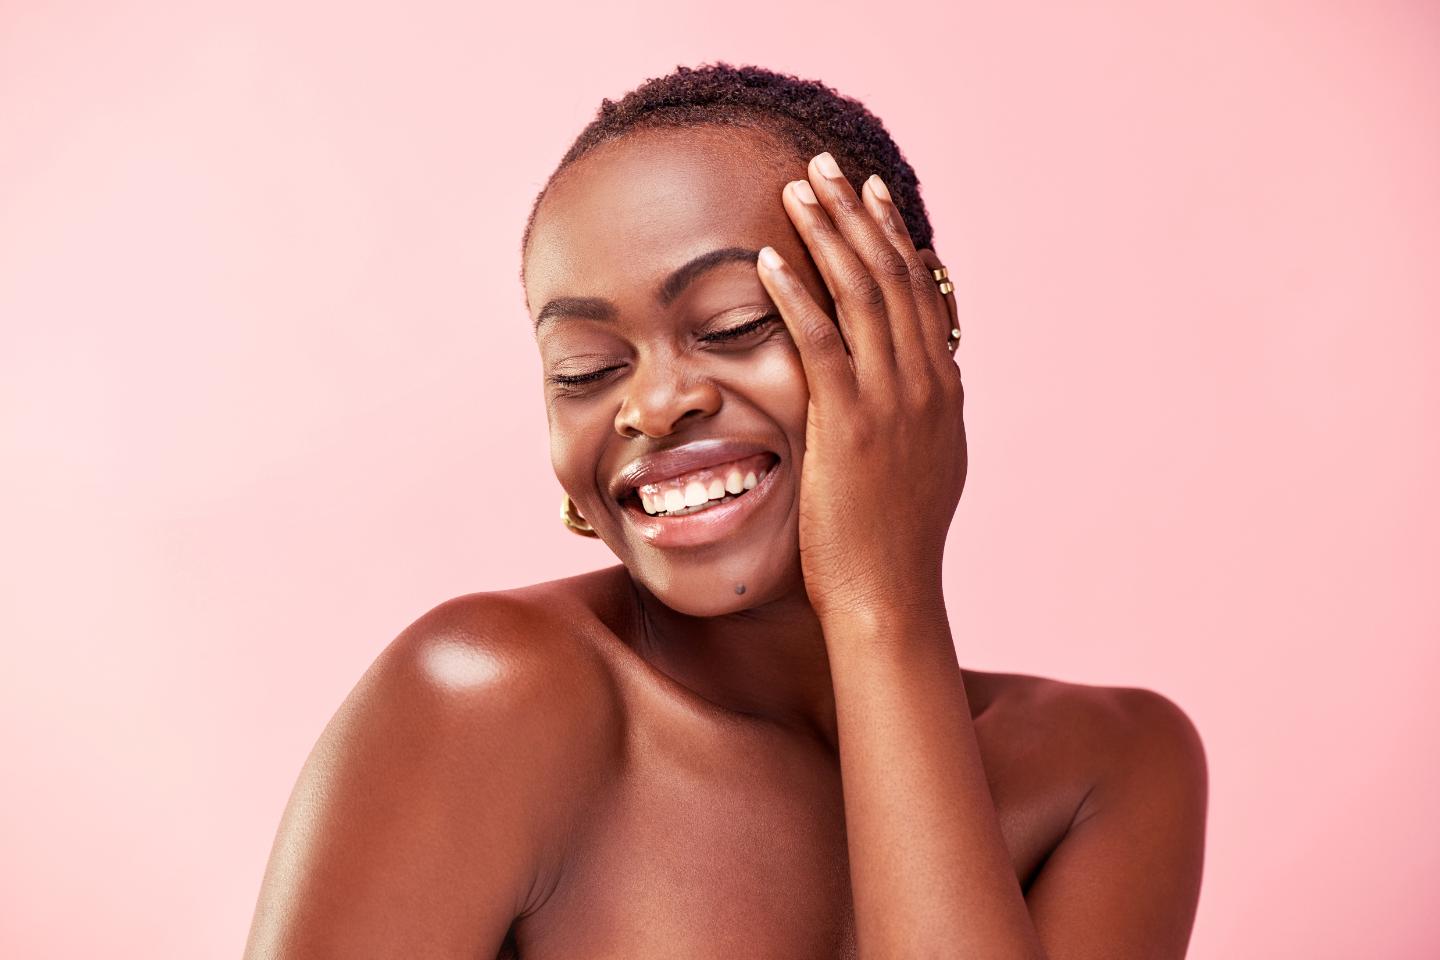 A black woman is smiling with her hands on her face, showcasing her refreshed and rejuvenated skin after undergoing a cosmetic procedure like microneedling.